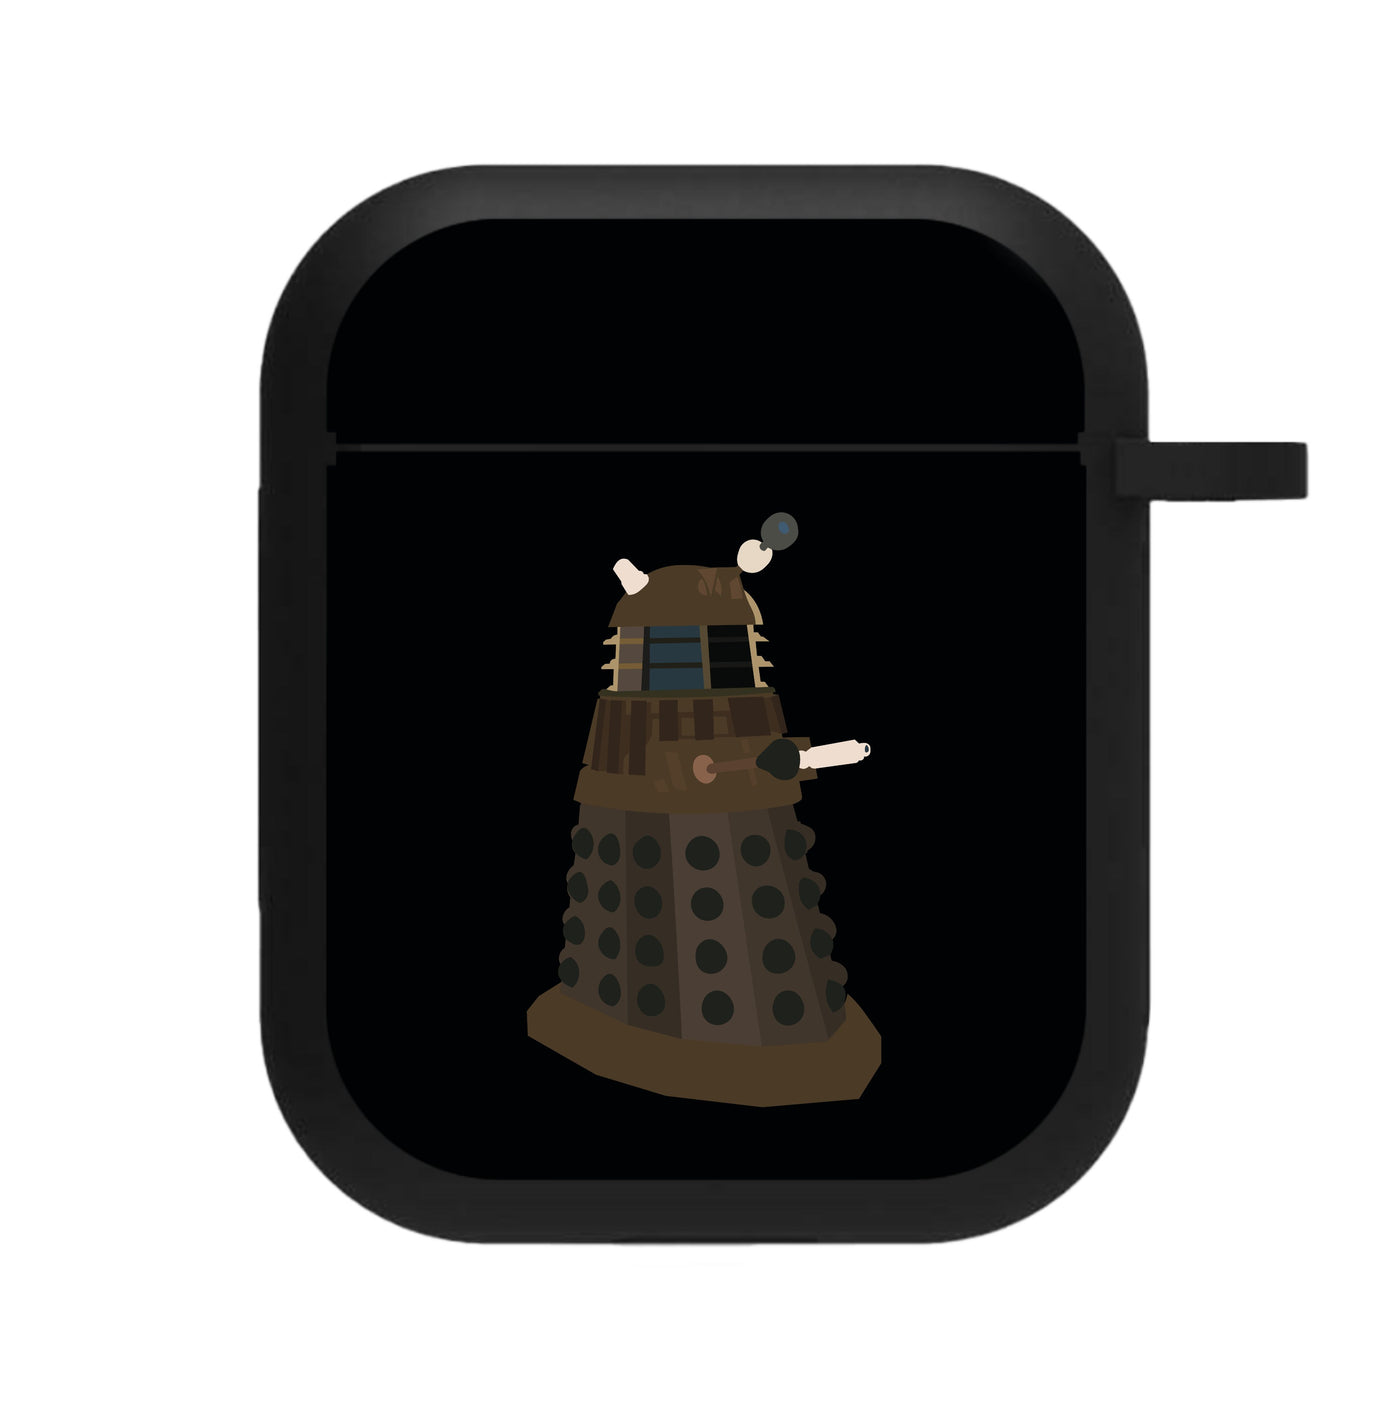 Dalek - Doctor Who AirPods Case